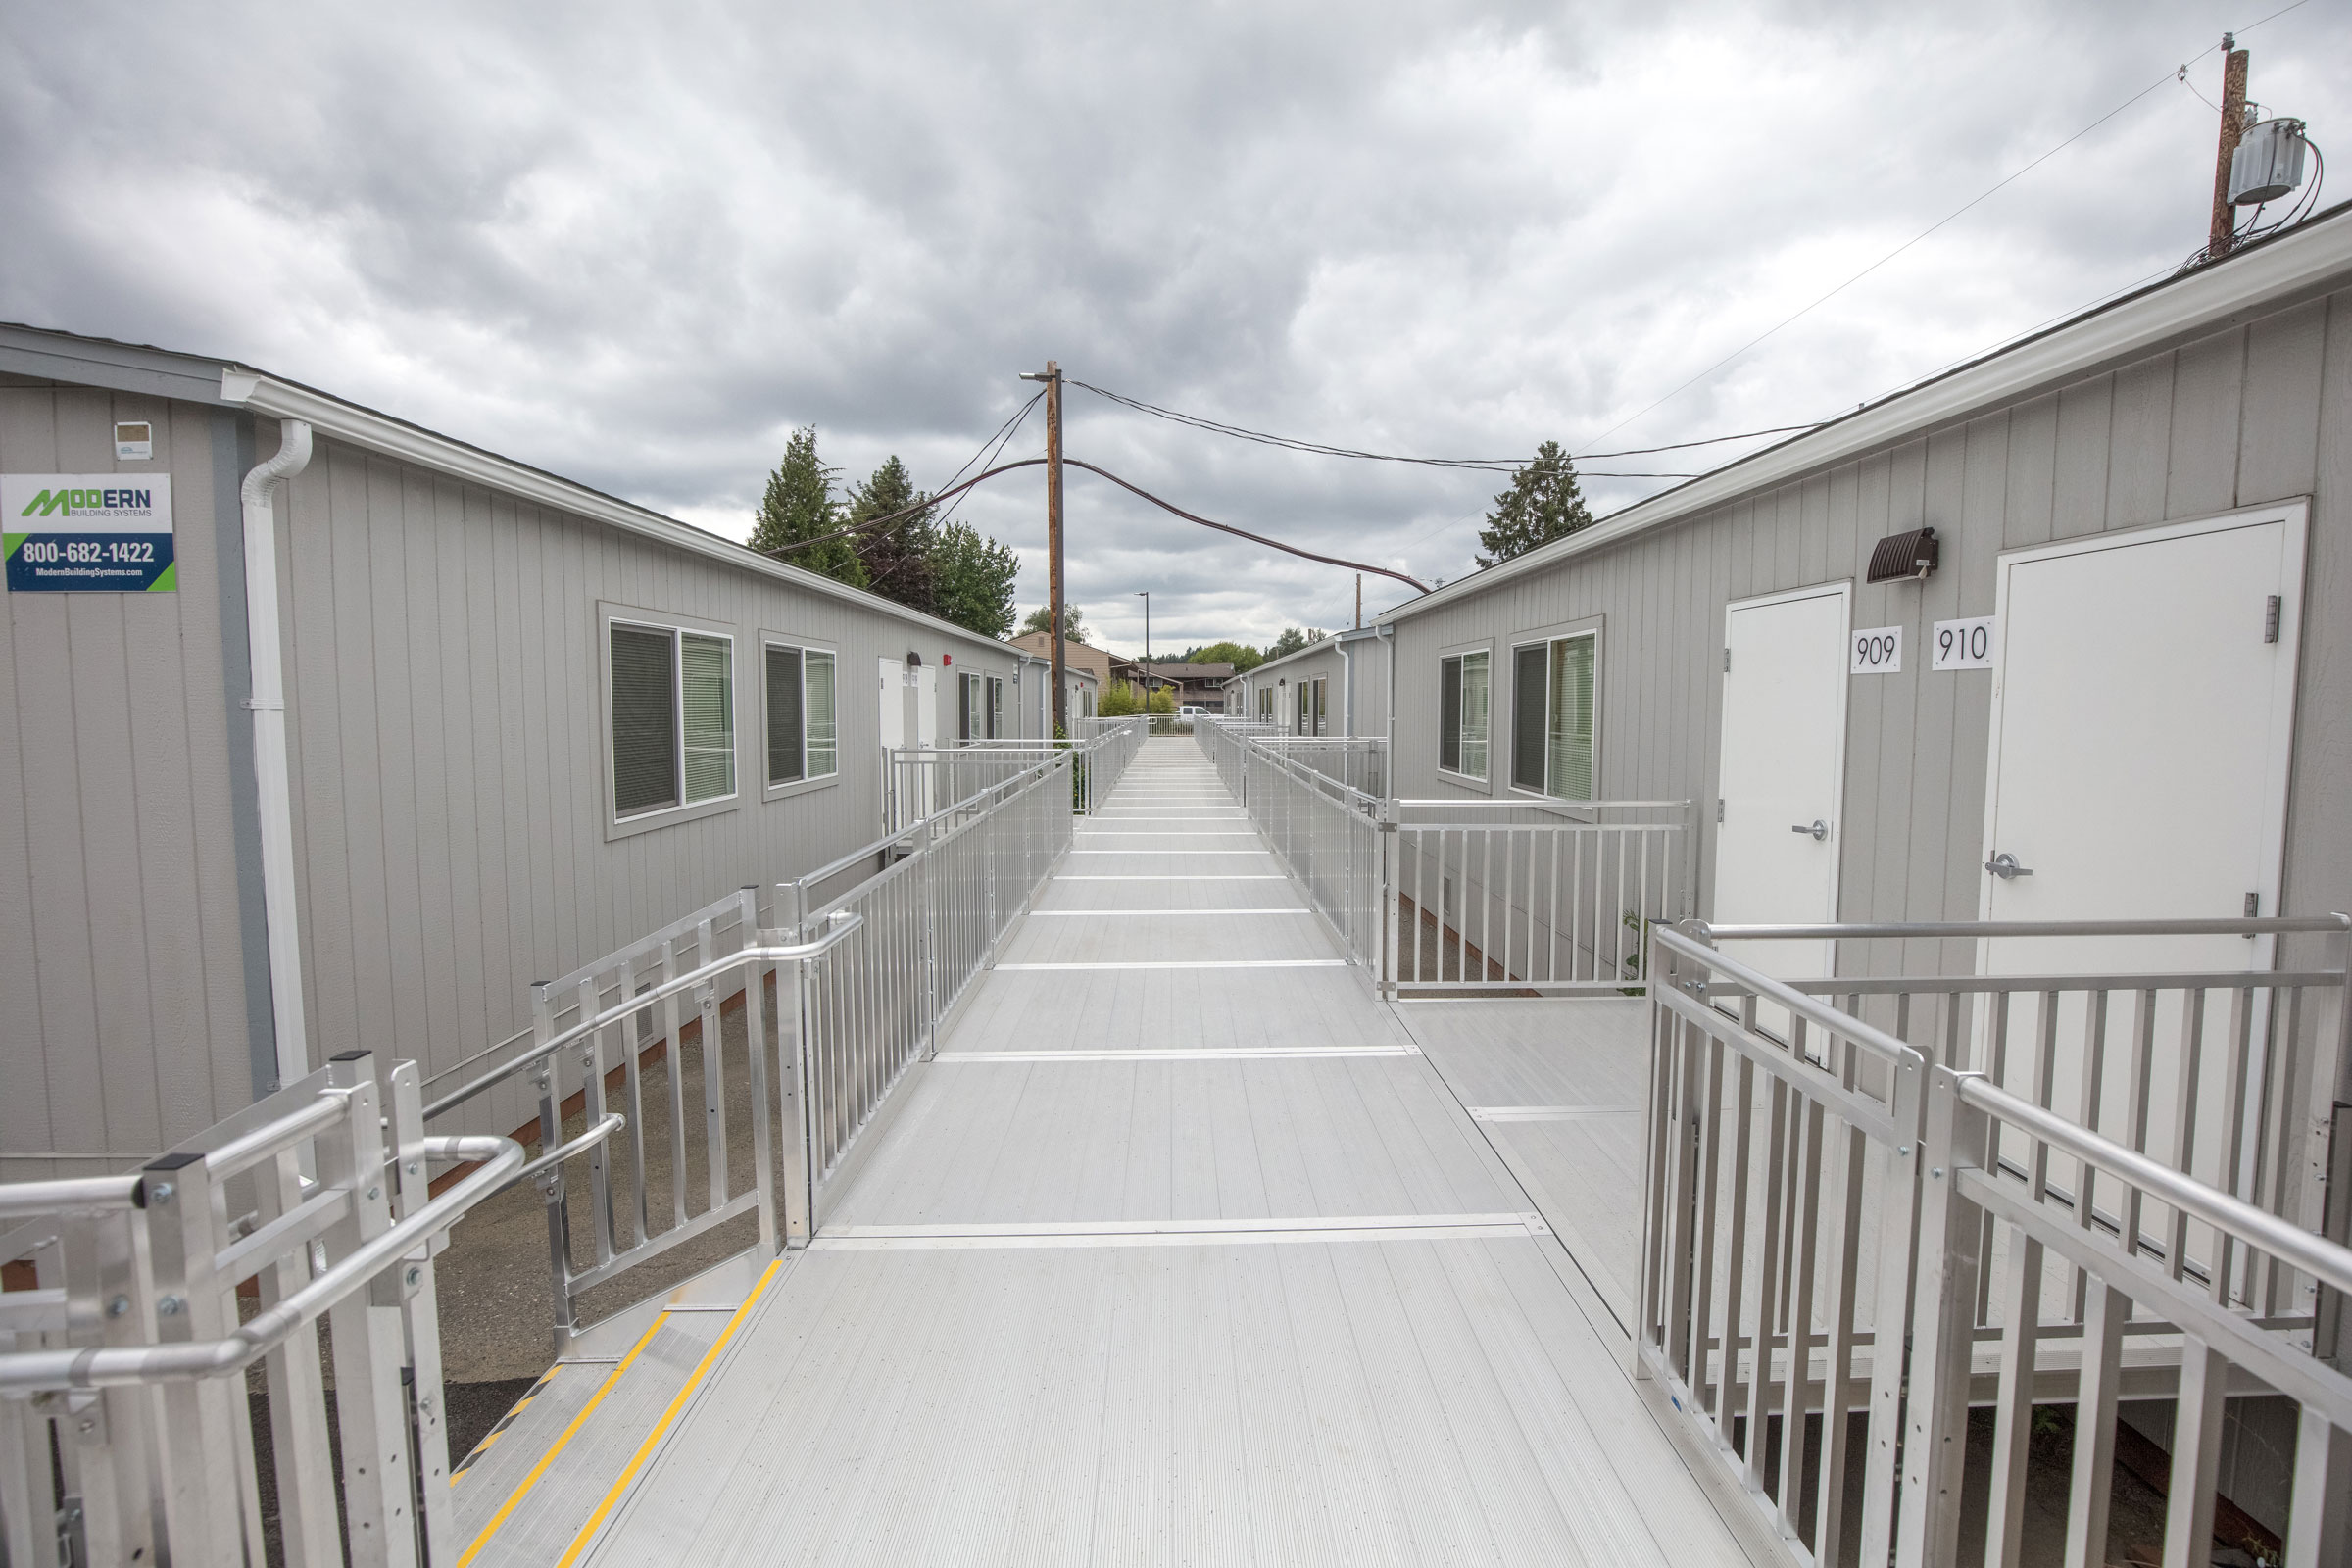 What Makes Aluminum Such a Sustainable Material for Access Ramps?